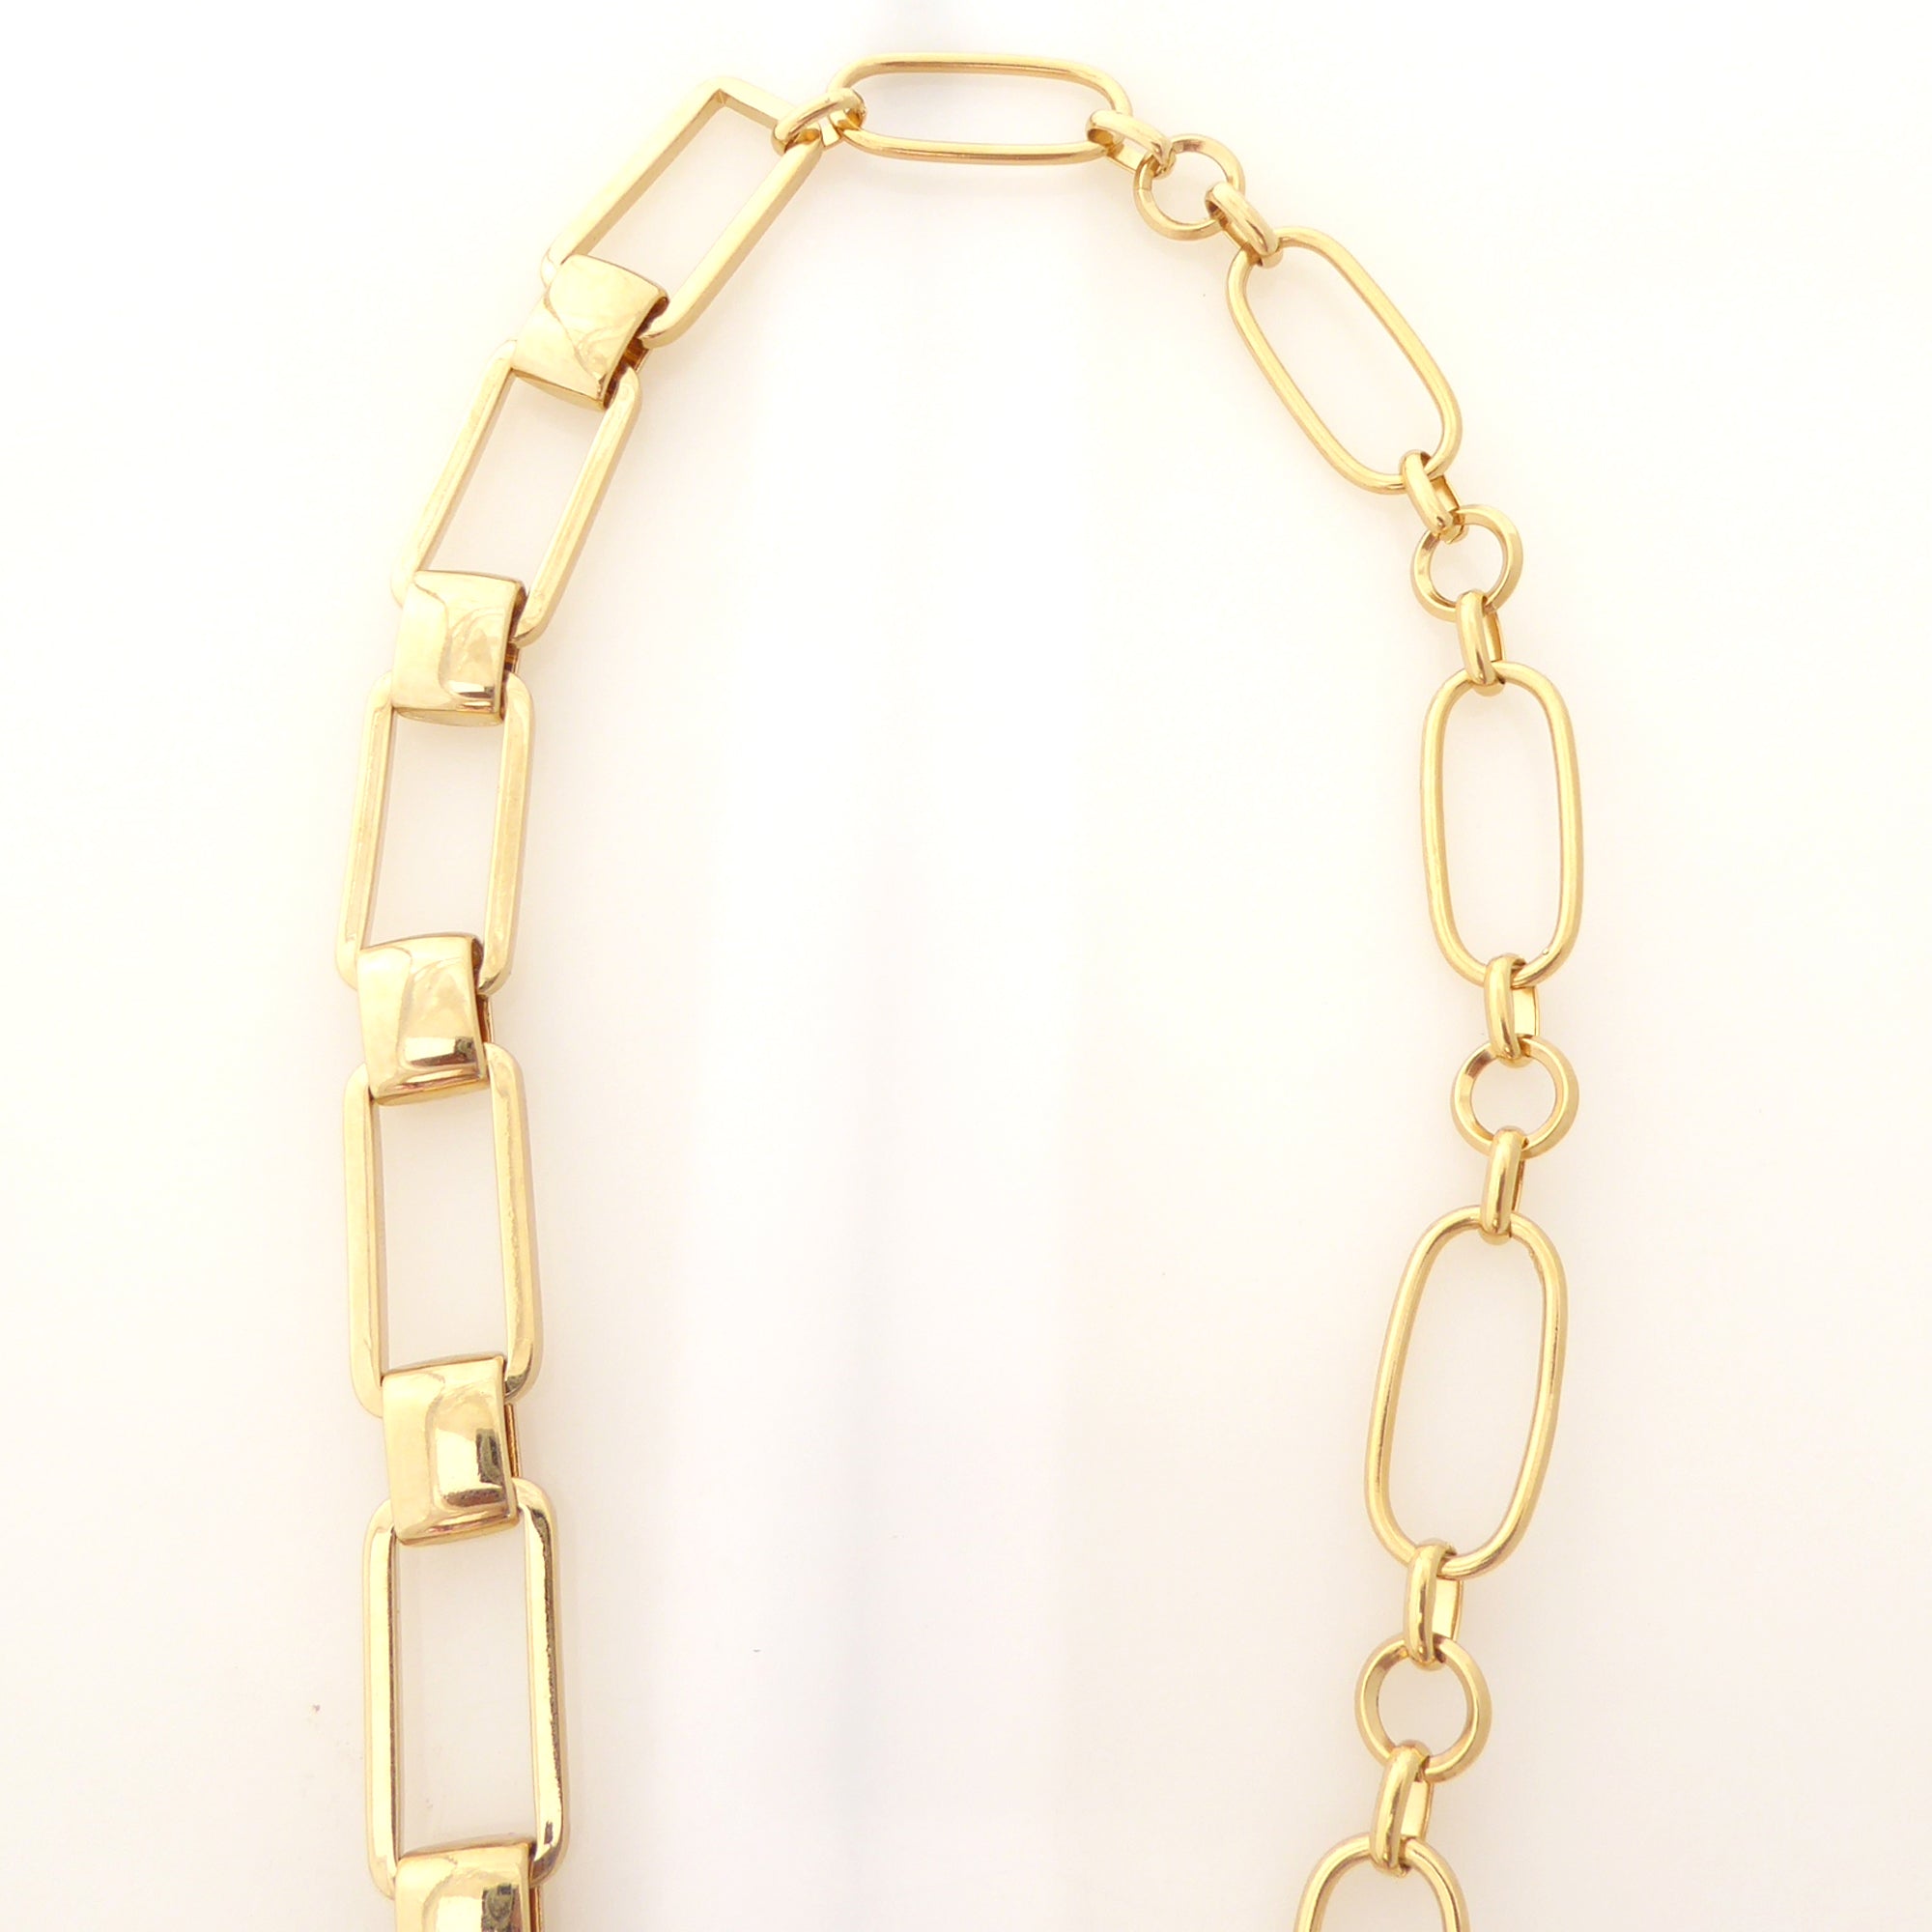 Gold geometric link necklace